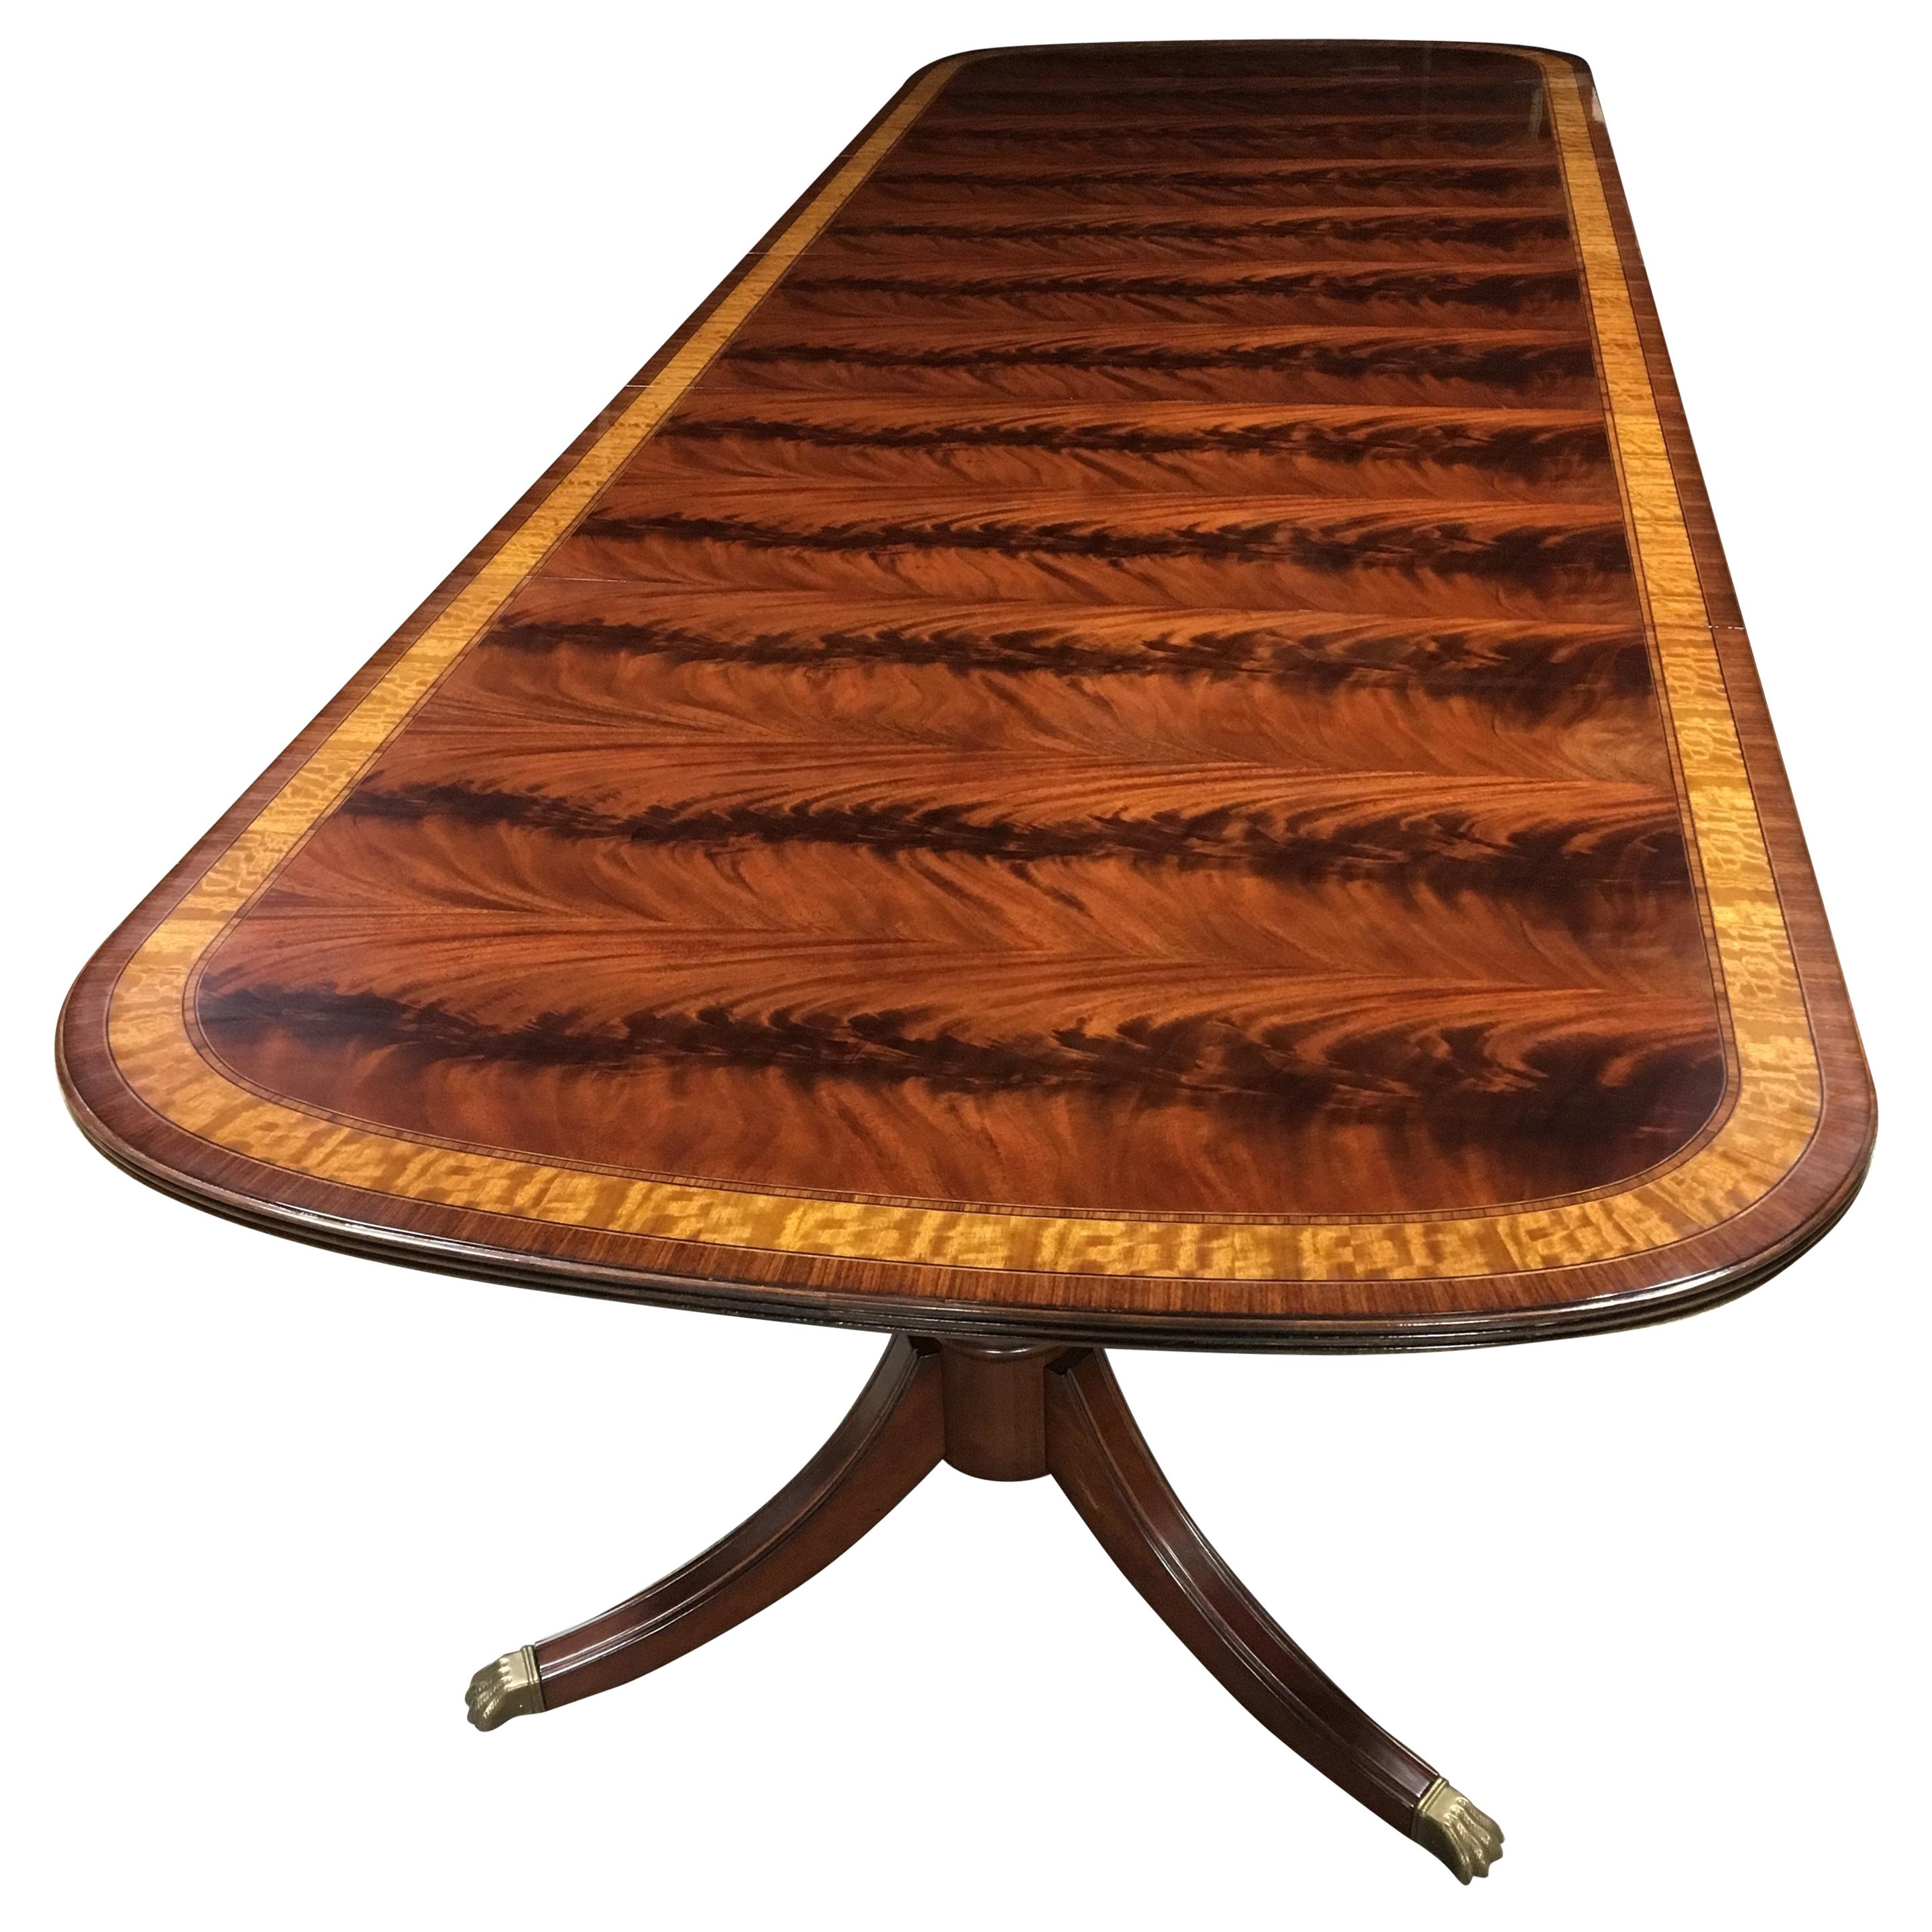 This is a made-to-order large traditional Mahogany dining table made in the Leighton Hall shop. It features a field of slip-matched swirly crotch mahogany from West Africa and Satinwood and Pau Ferro borders from South America. It has a hand rubbed